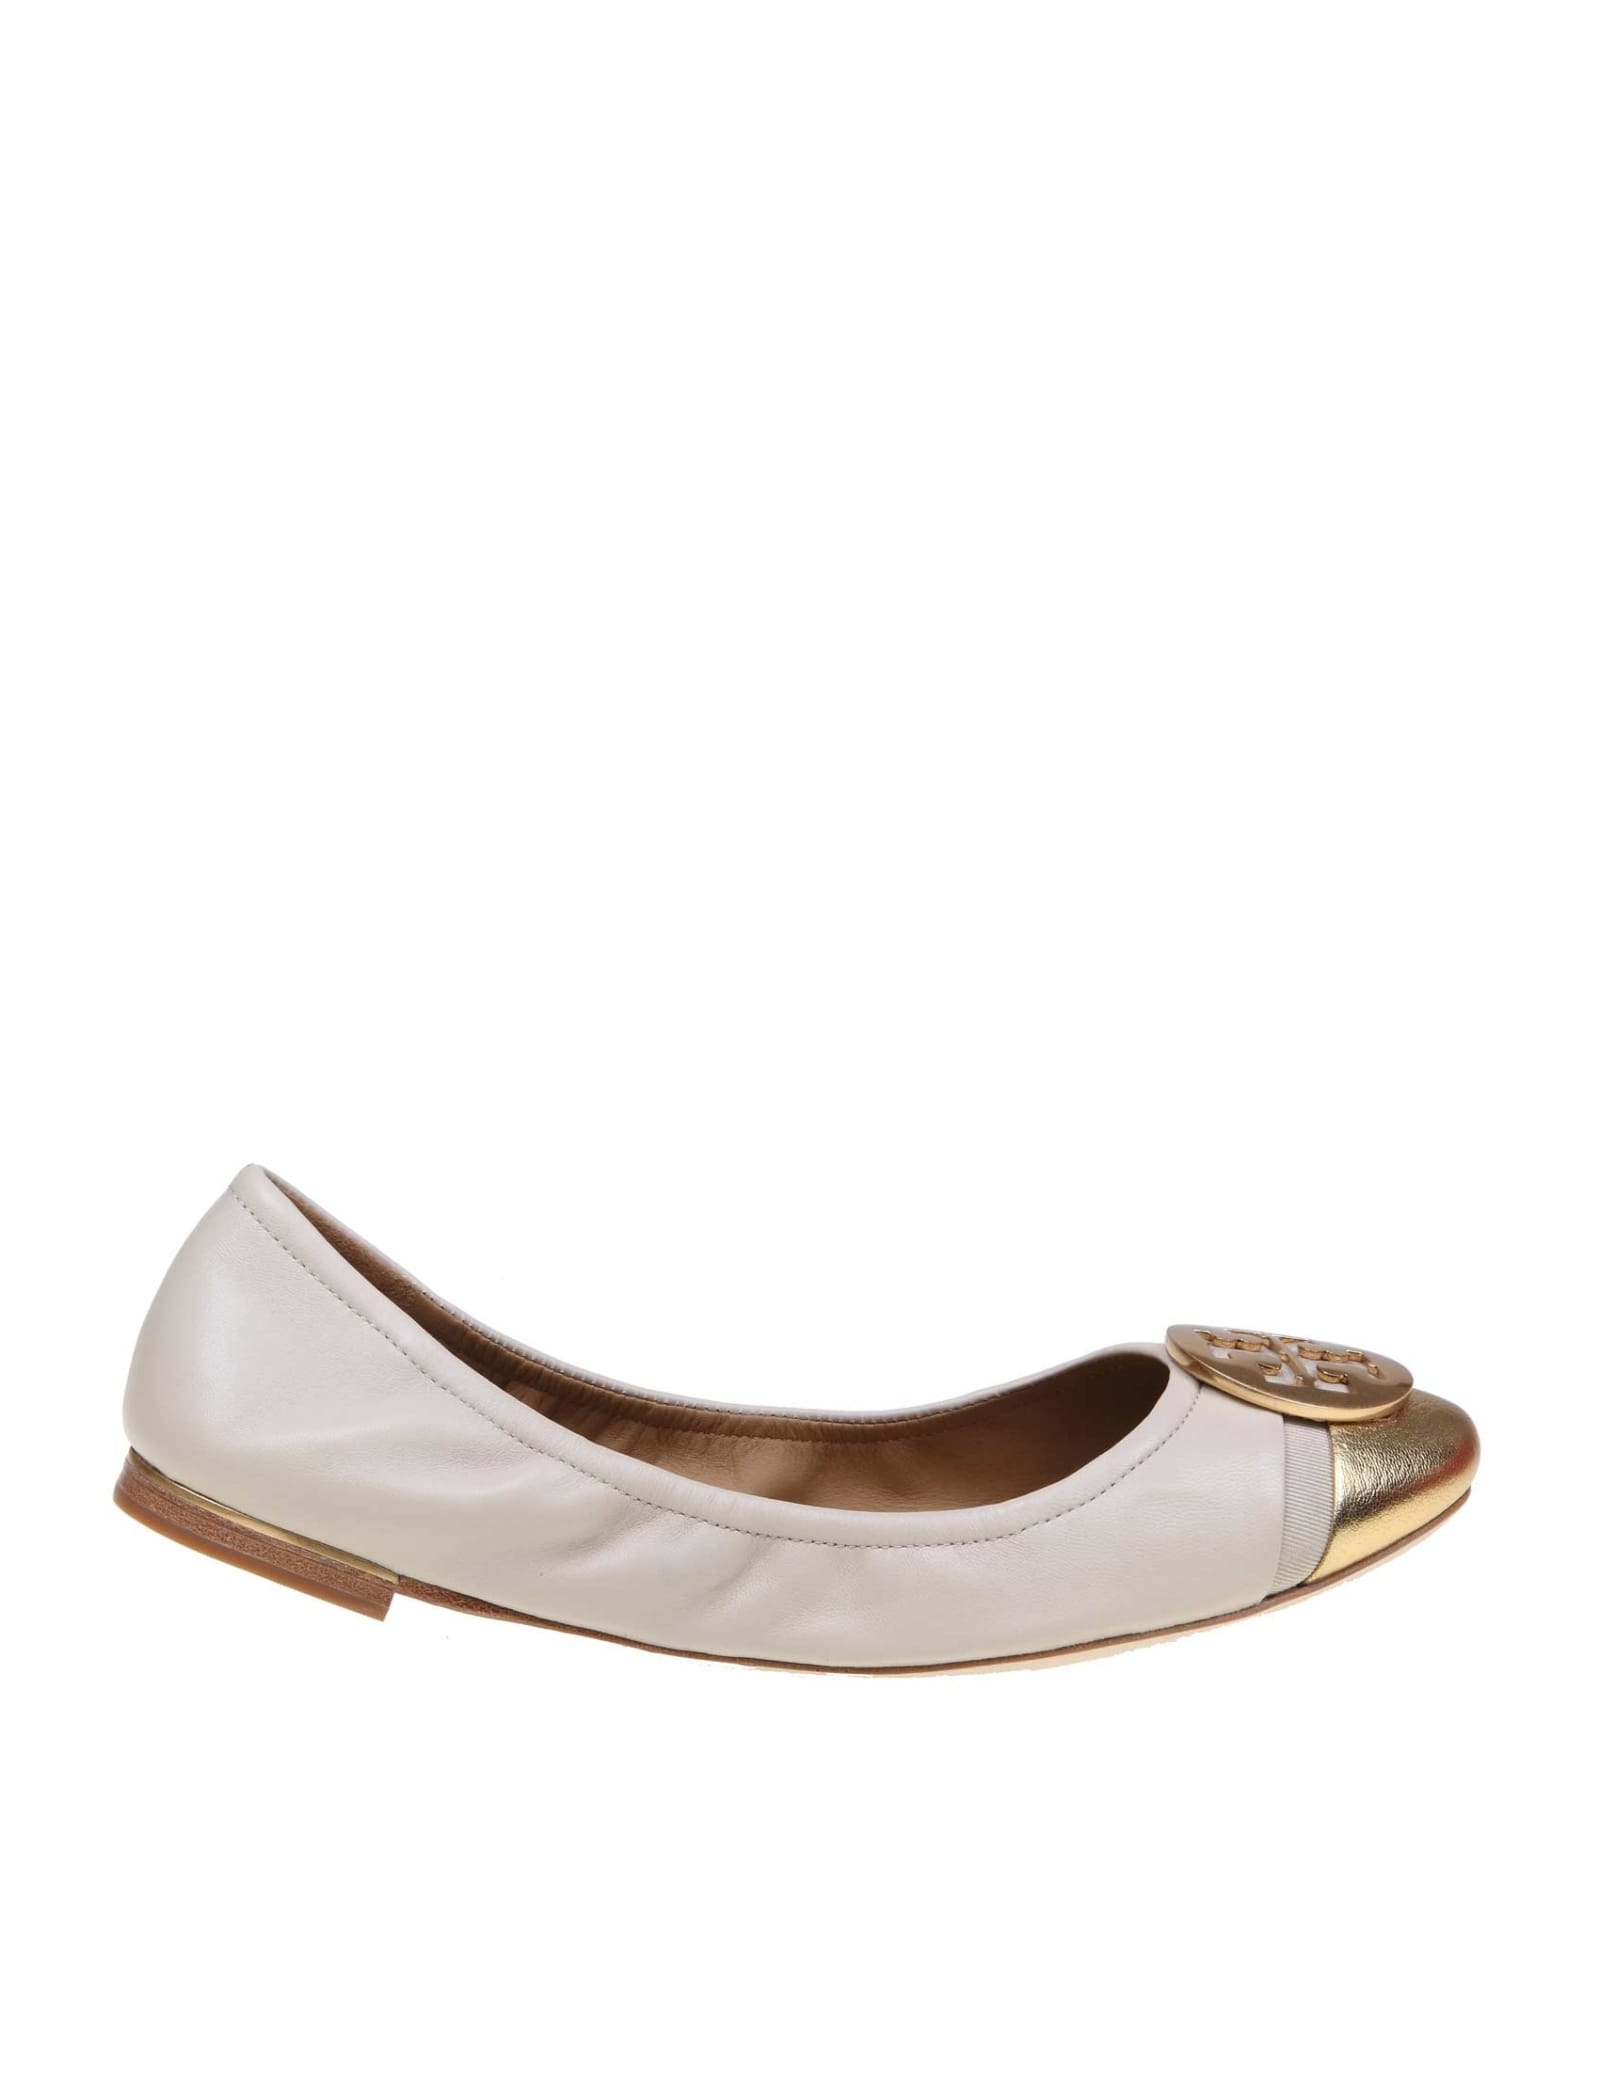 Photo of  Tory Burch Minnie Cap-toe Ballerina Flat Leather Ballet Ivory Color / Gold- shop Tory Burch Flats online sales